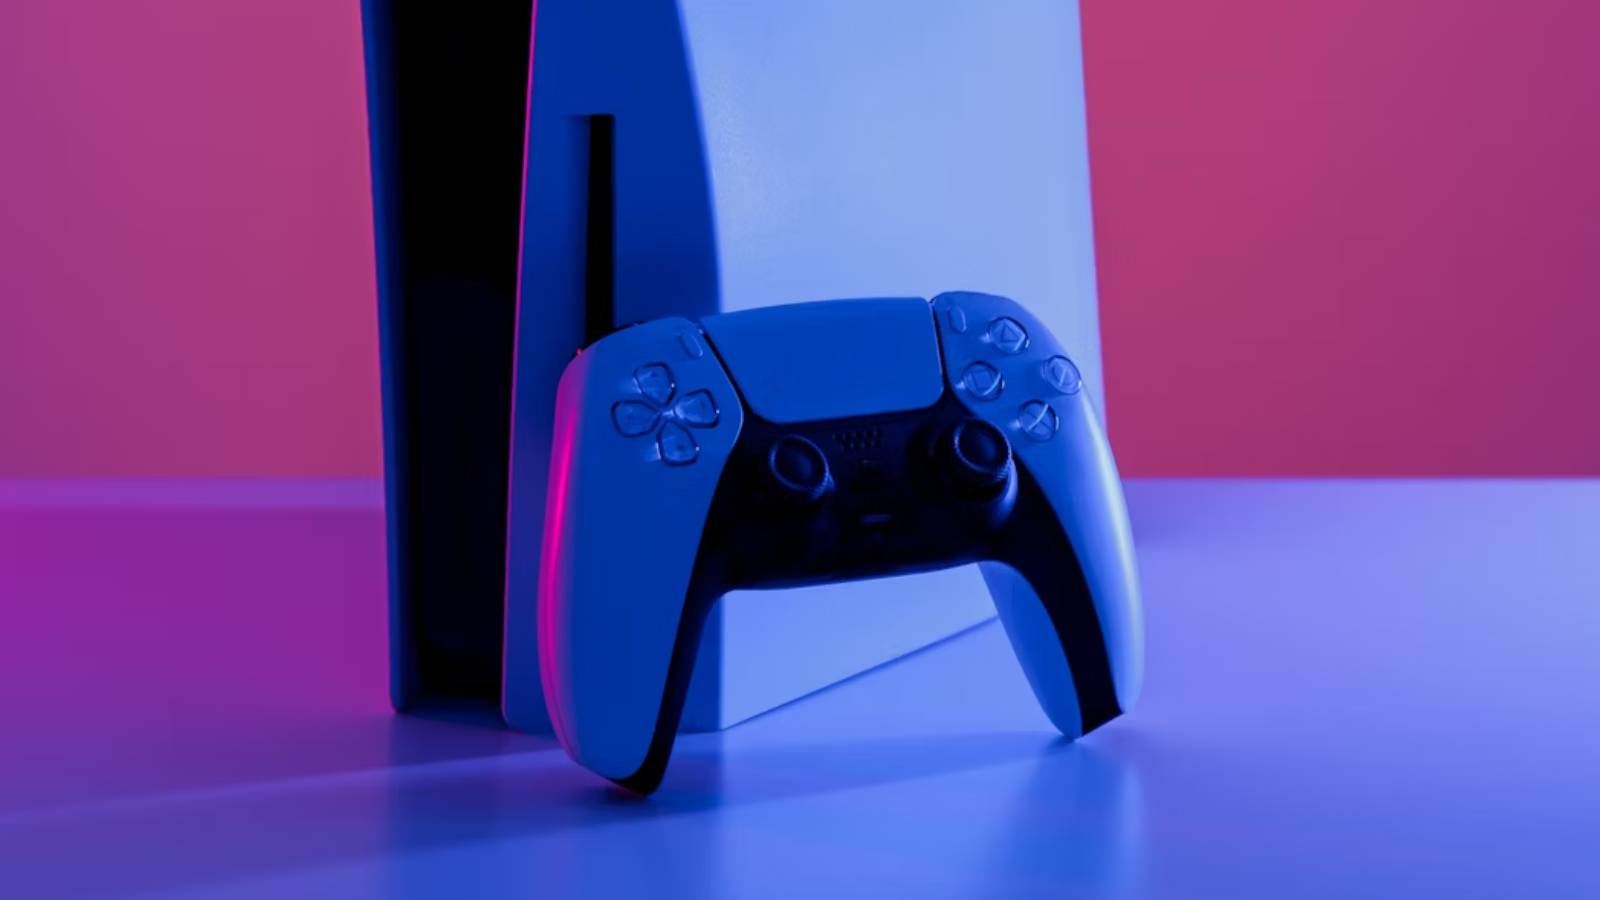 Close-up photo of the PS5 and its DualSense controller by Martin Katler on Unsplash